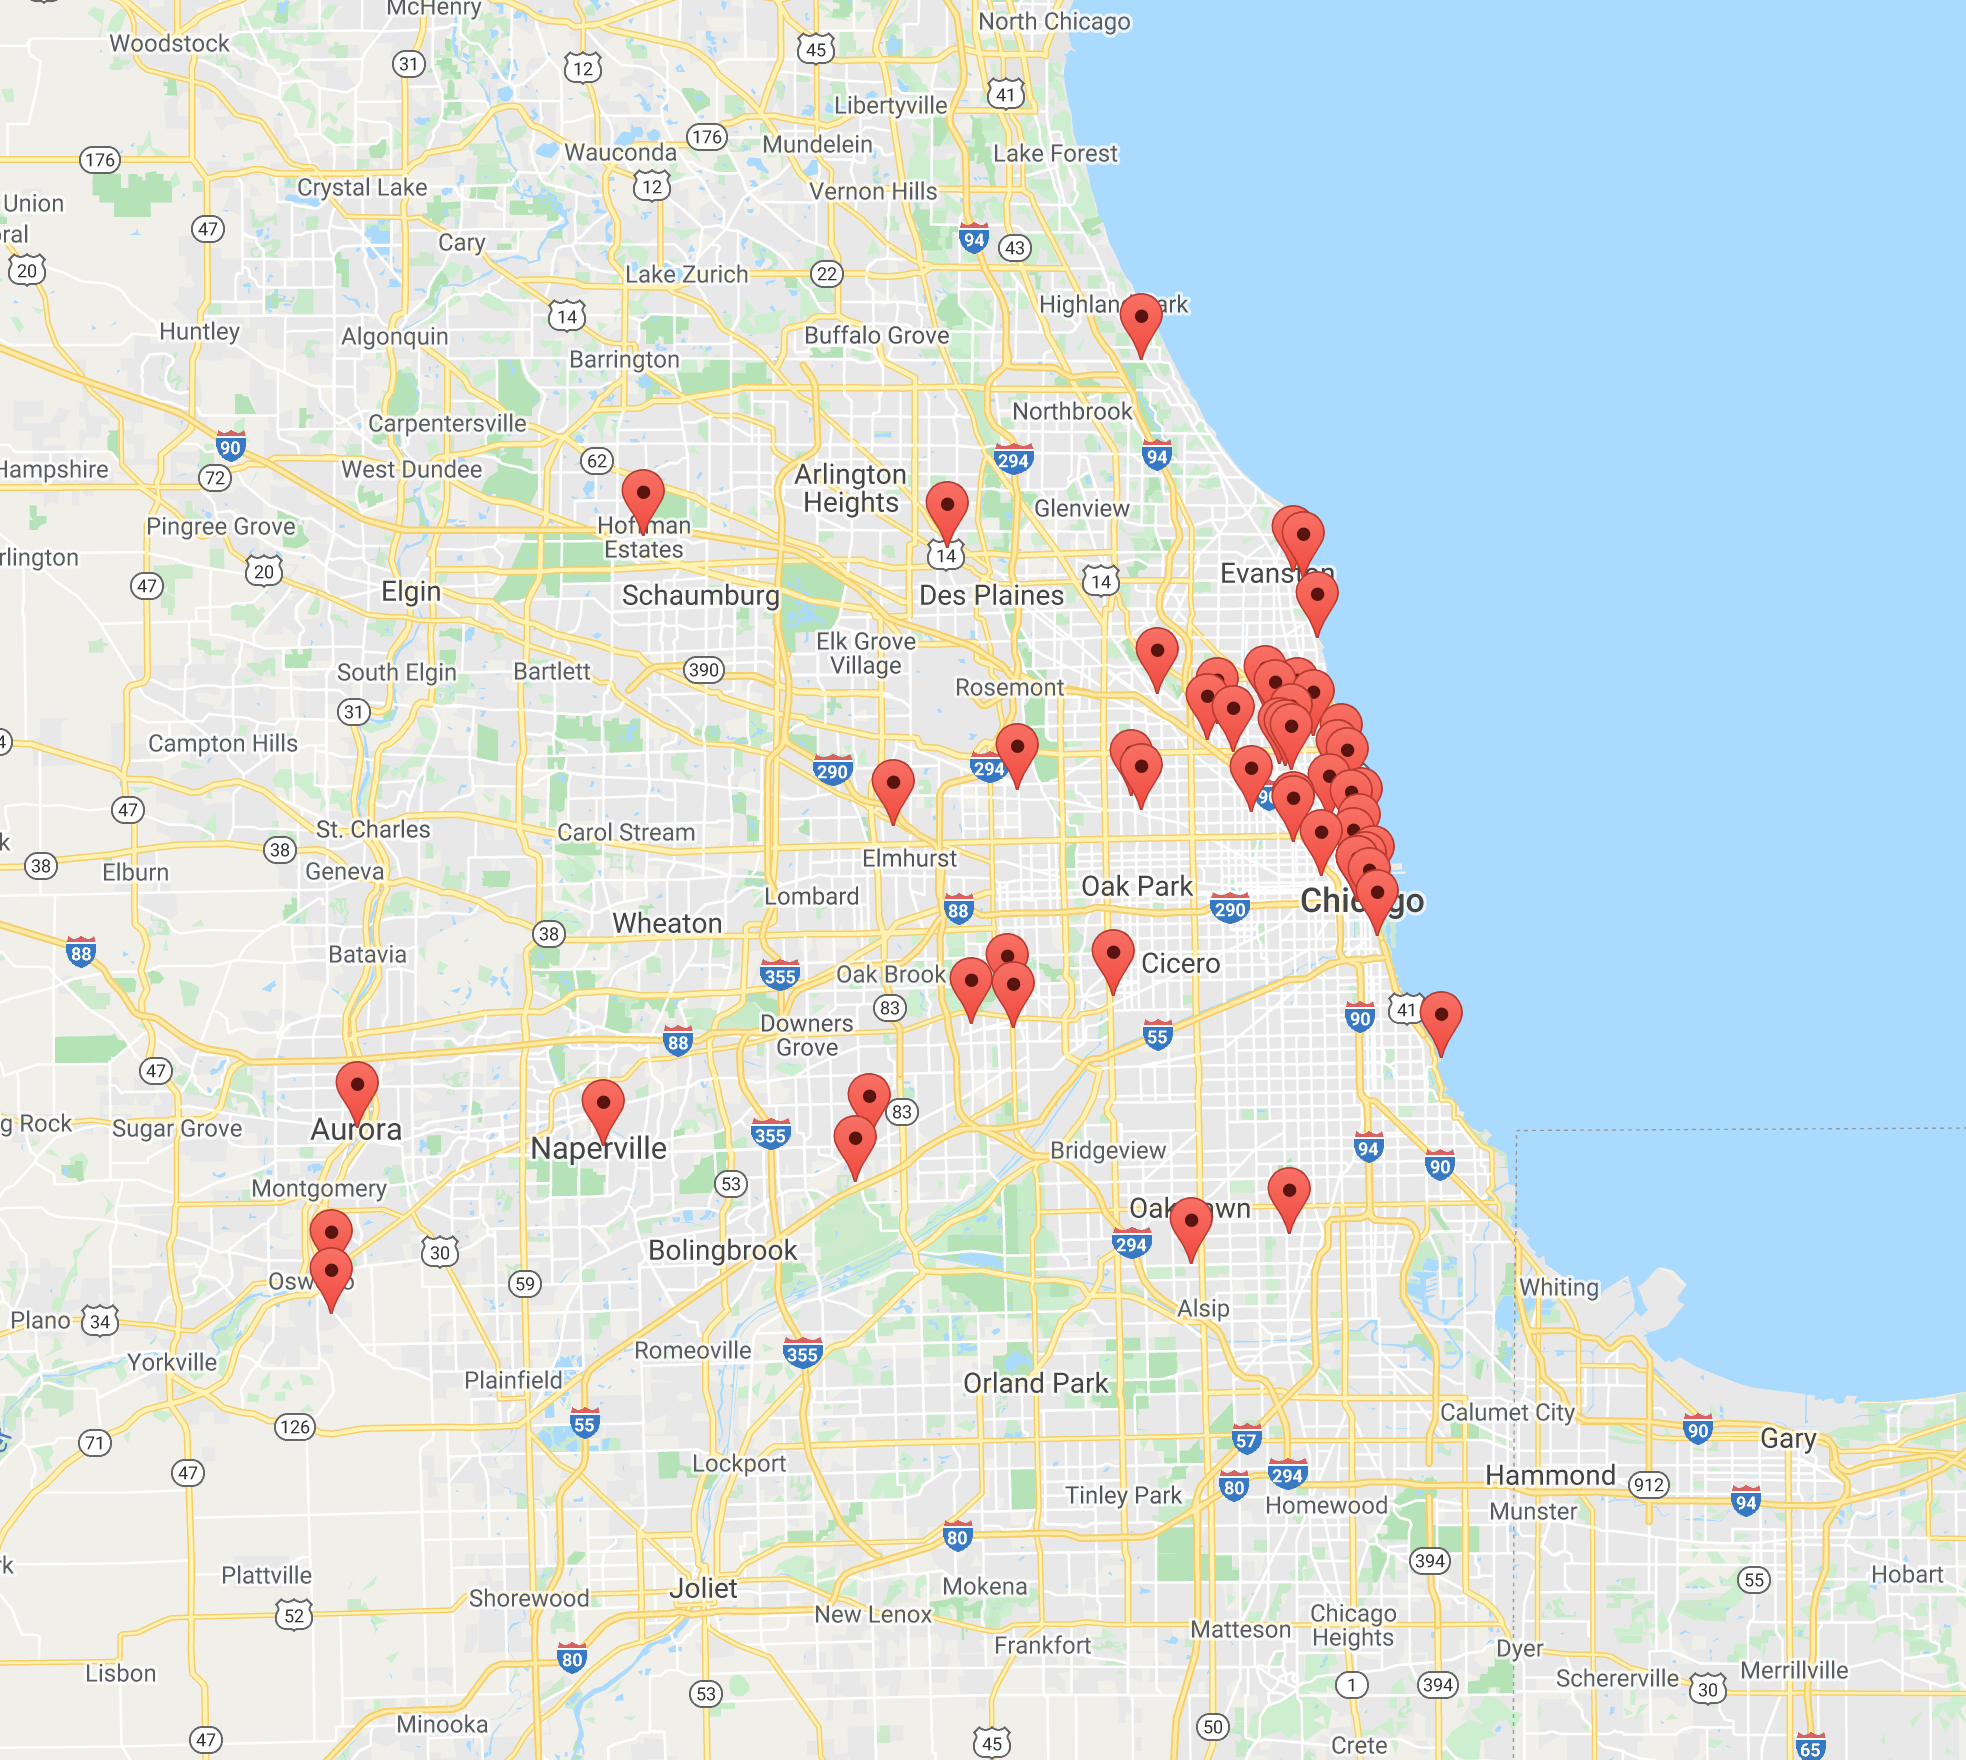 Photo of a map of Chicago. On the right, Lake Michigan is represented in blue, while the city to the left is gray with white lines representing the streets and yellow representing the highways. There are green areas representing parks across town. Red pins represent locations from where submissions were received. They are mainly grouped along the Northern coast of the city. A few more are scattered outwards towards the suburbs.